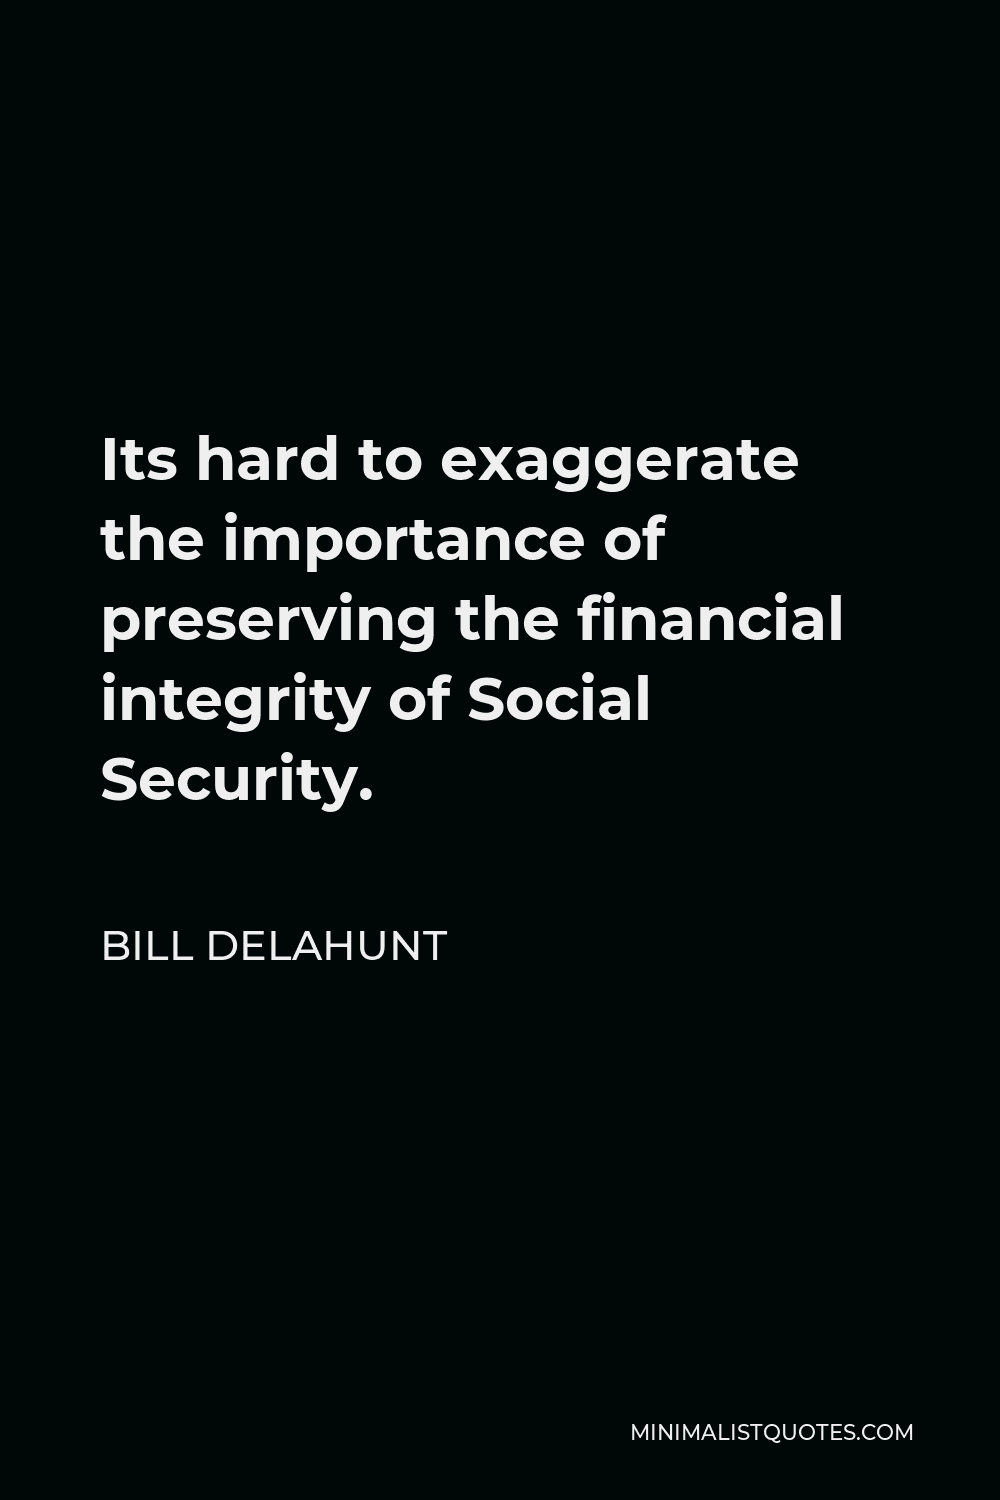 Bill Delahunt Quote - Its hard to exaggerate the importance of preserving the financial integrity of Social Security.